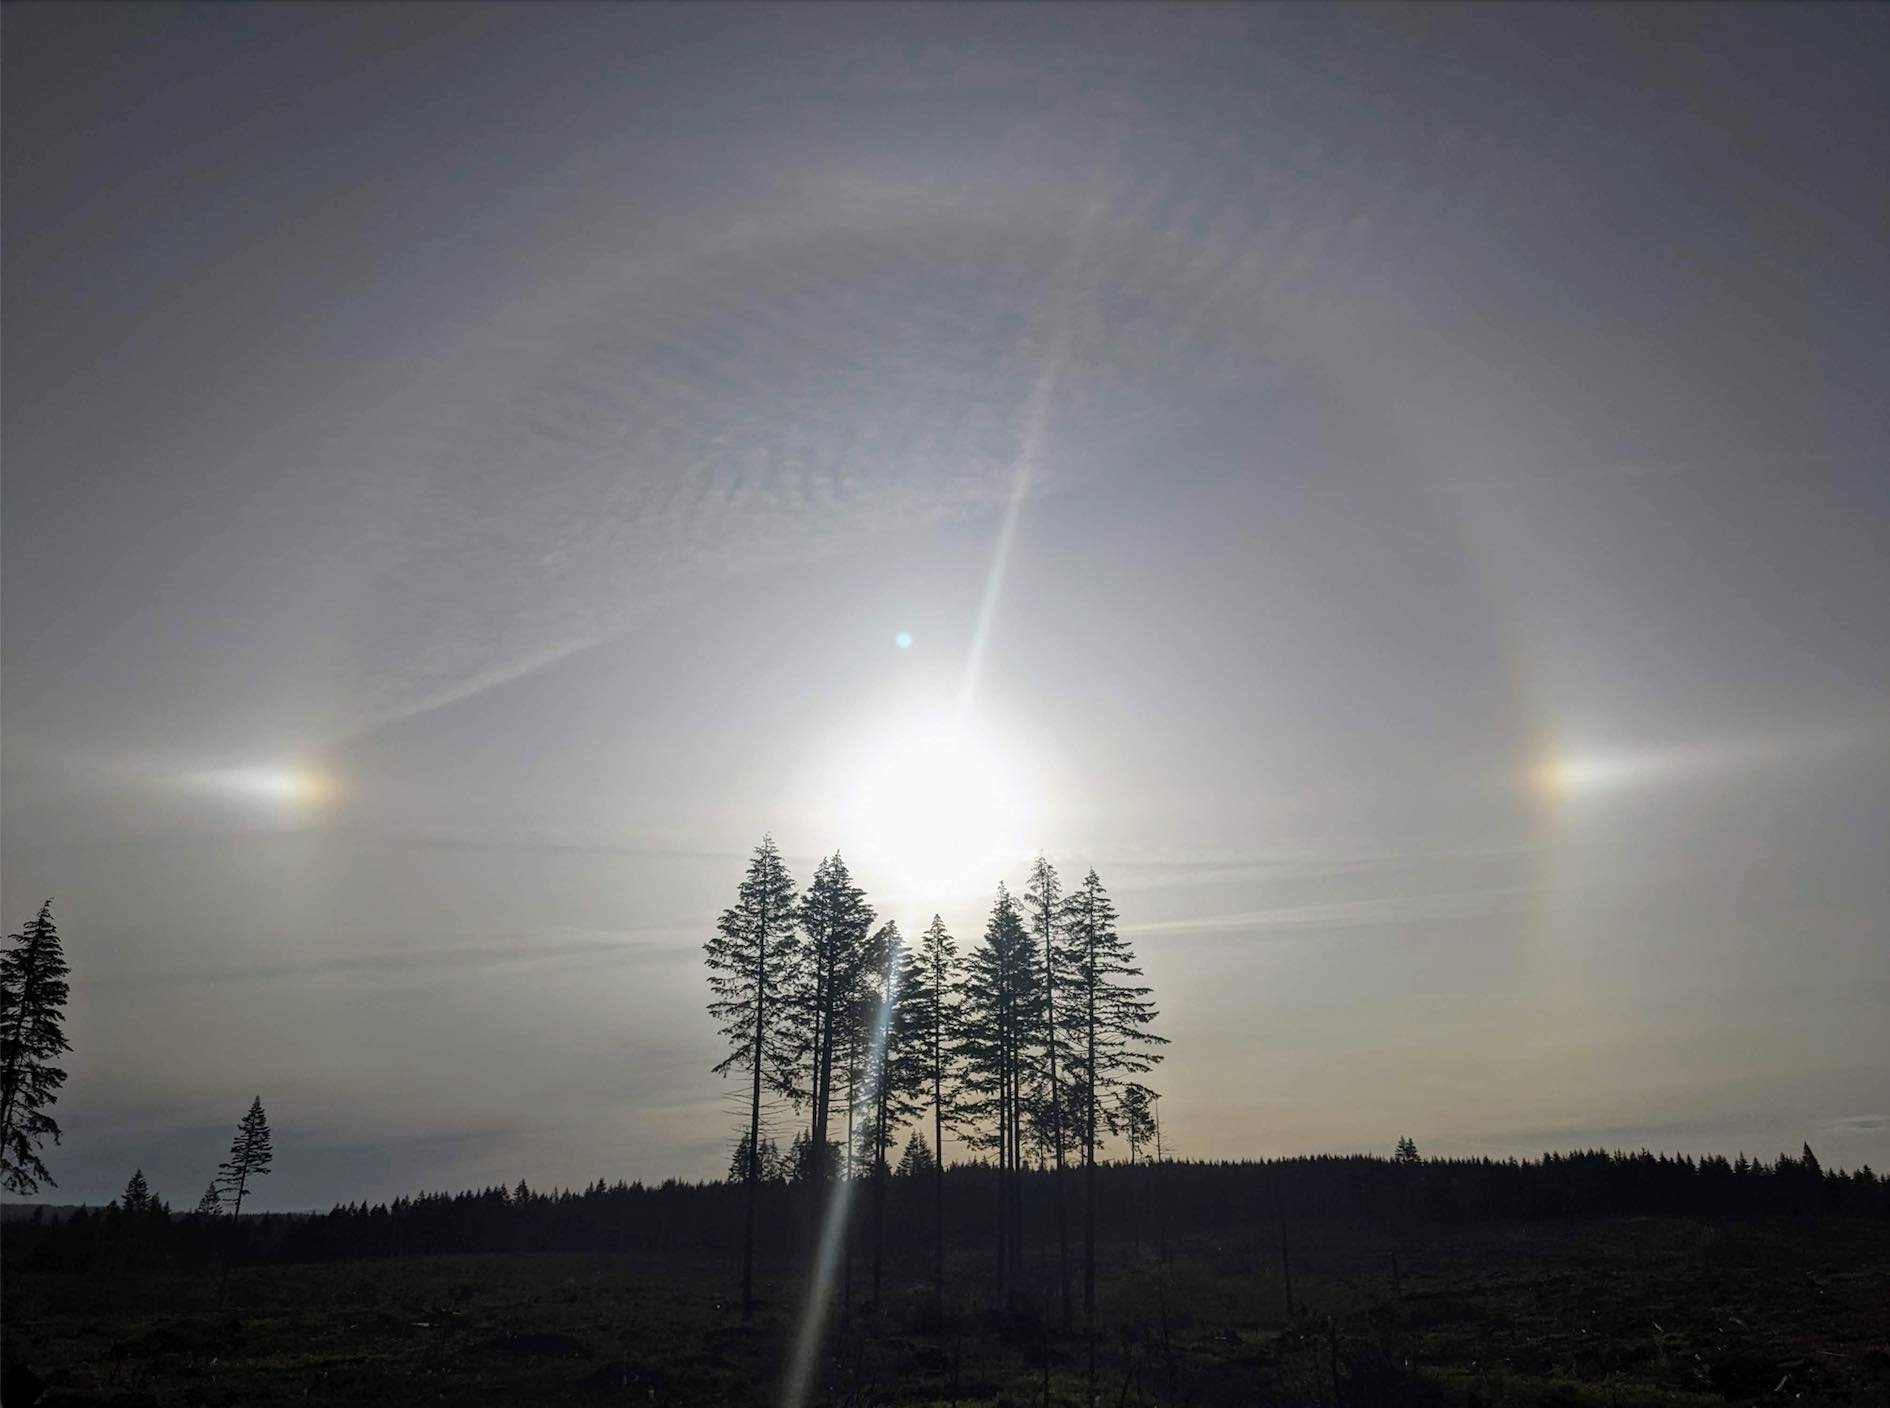 Have you seen the halo around the sun?